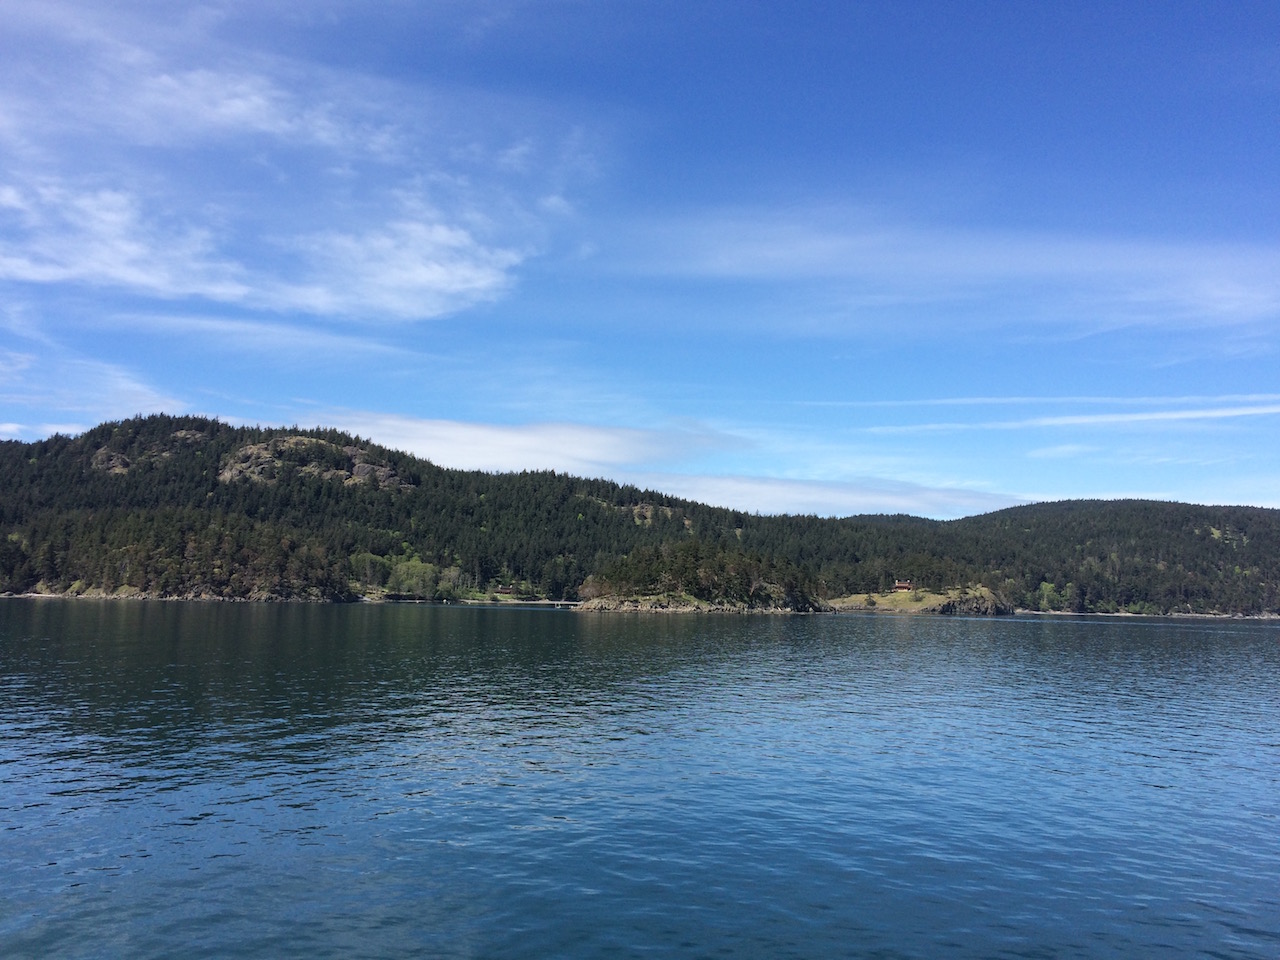 Another island view from Anacortes ferry by Judy K. Walker